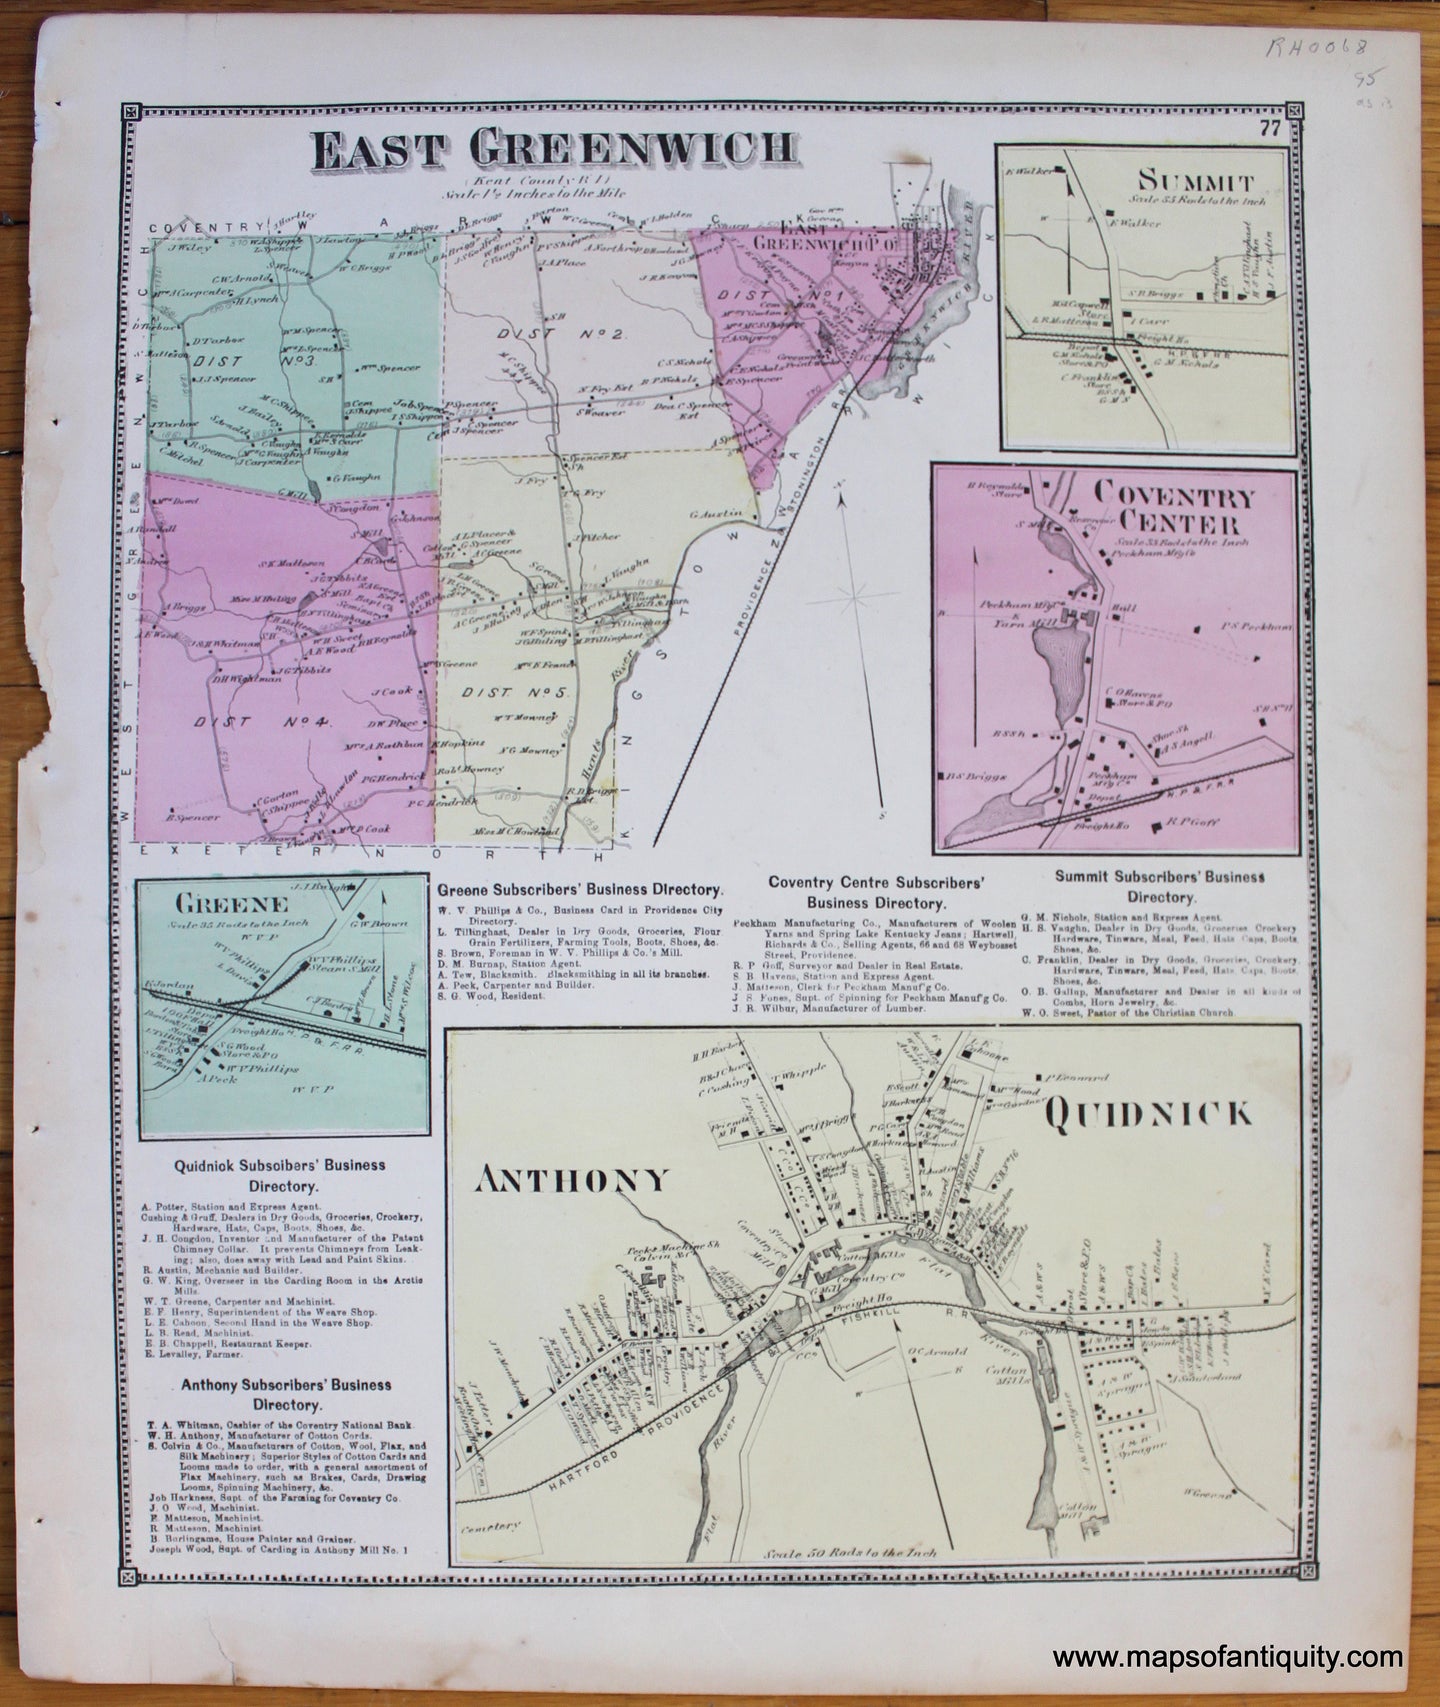 Antique-Hand-Colored-Map-East-Greenwich-Anthony-Quidnick-Coventry-Center-Summit-Greene-Rhode-Island-Rhode-Island--1870-Beers-Maps-Of-Antiquity